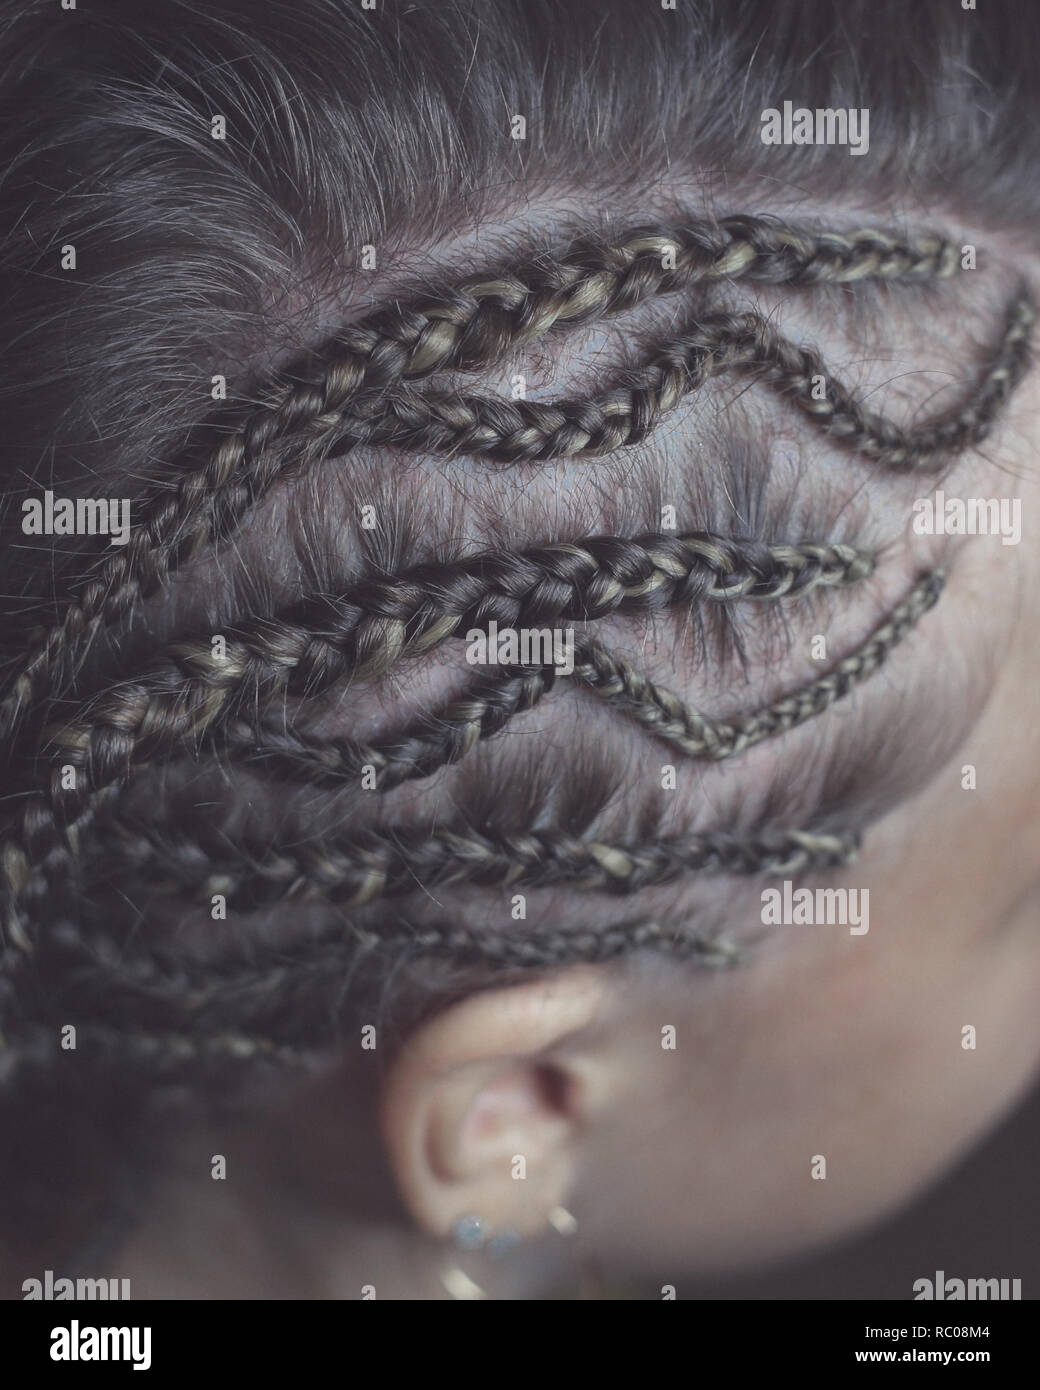 braids on the temple Stock Photo